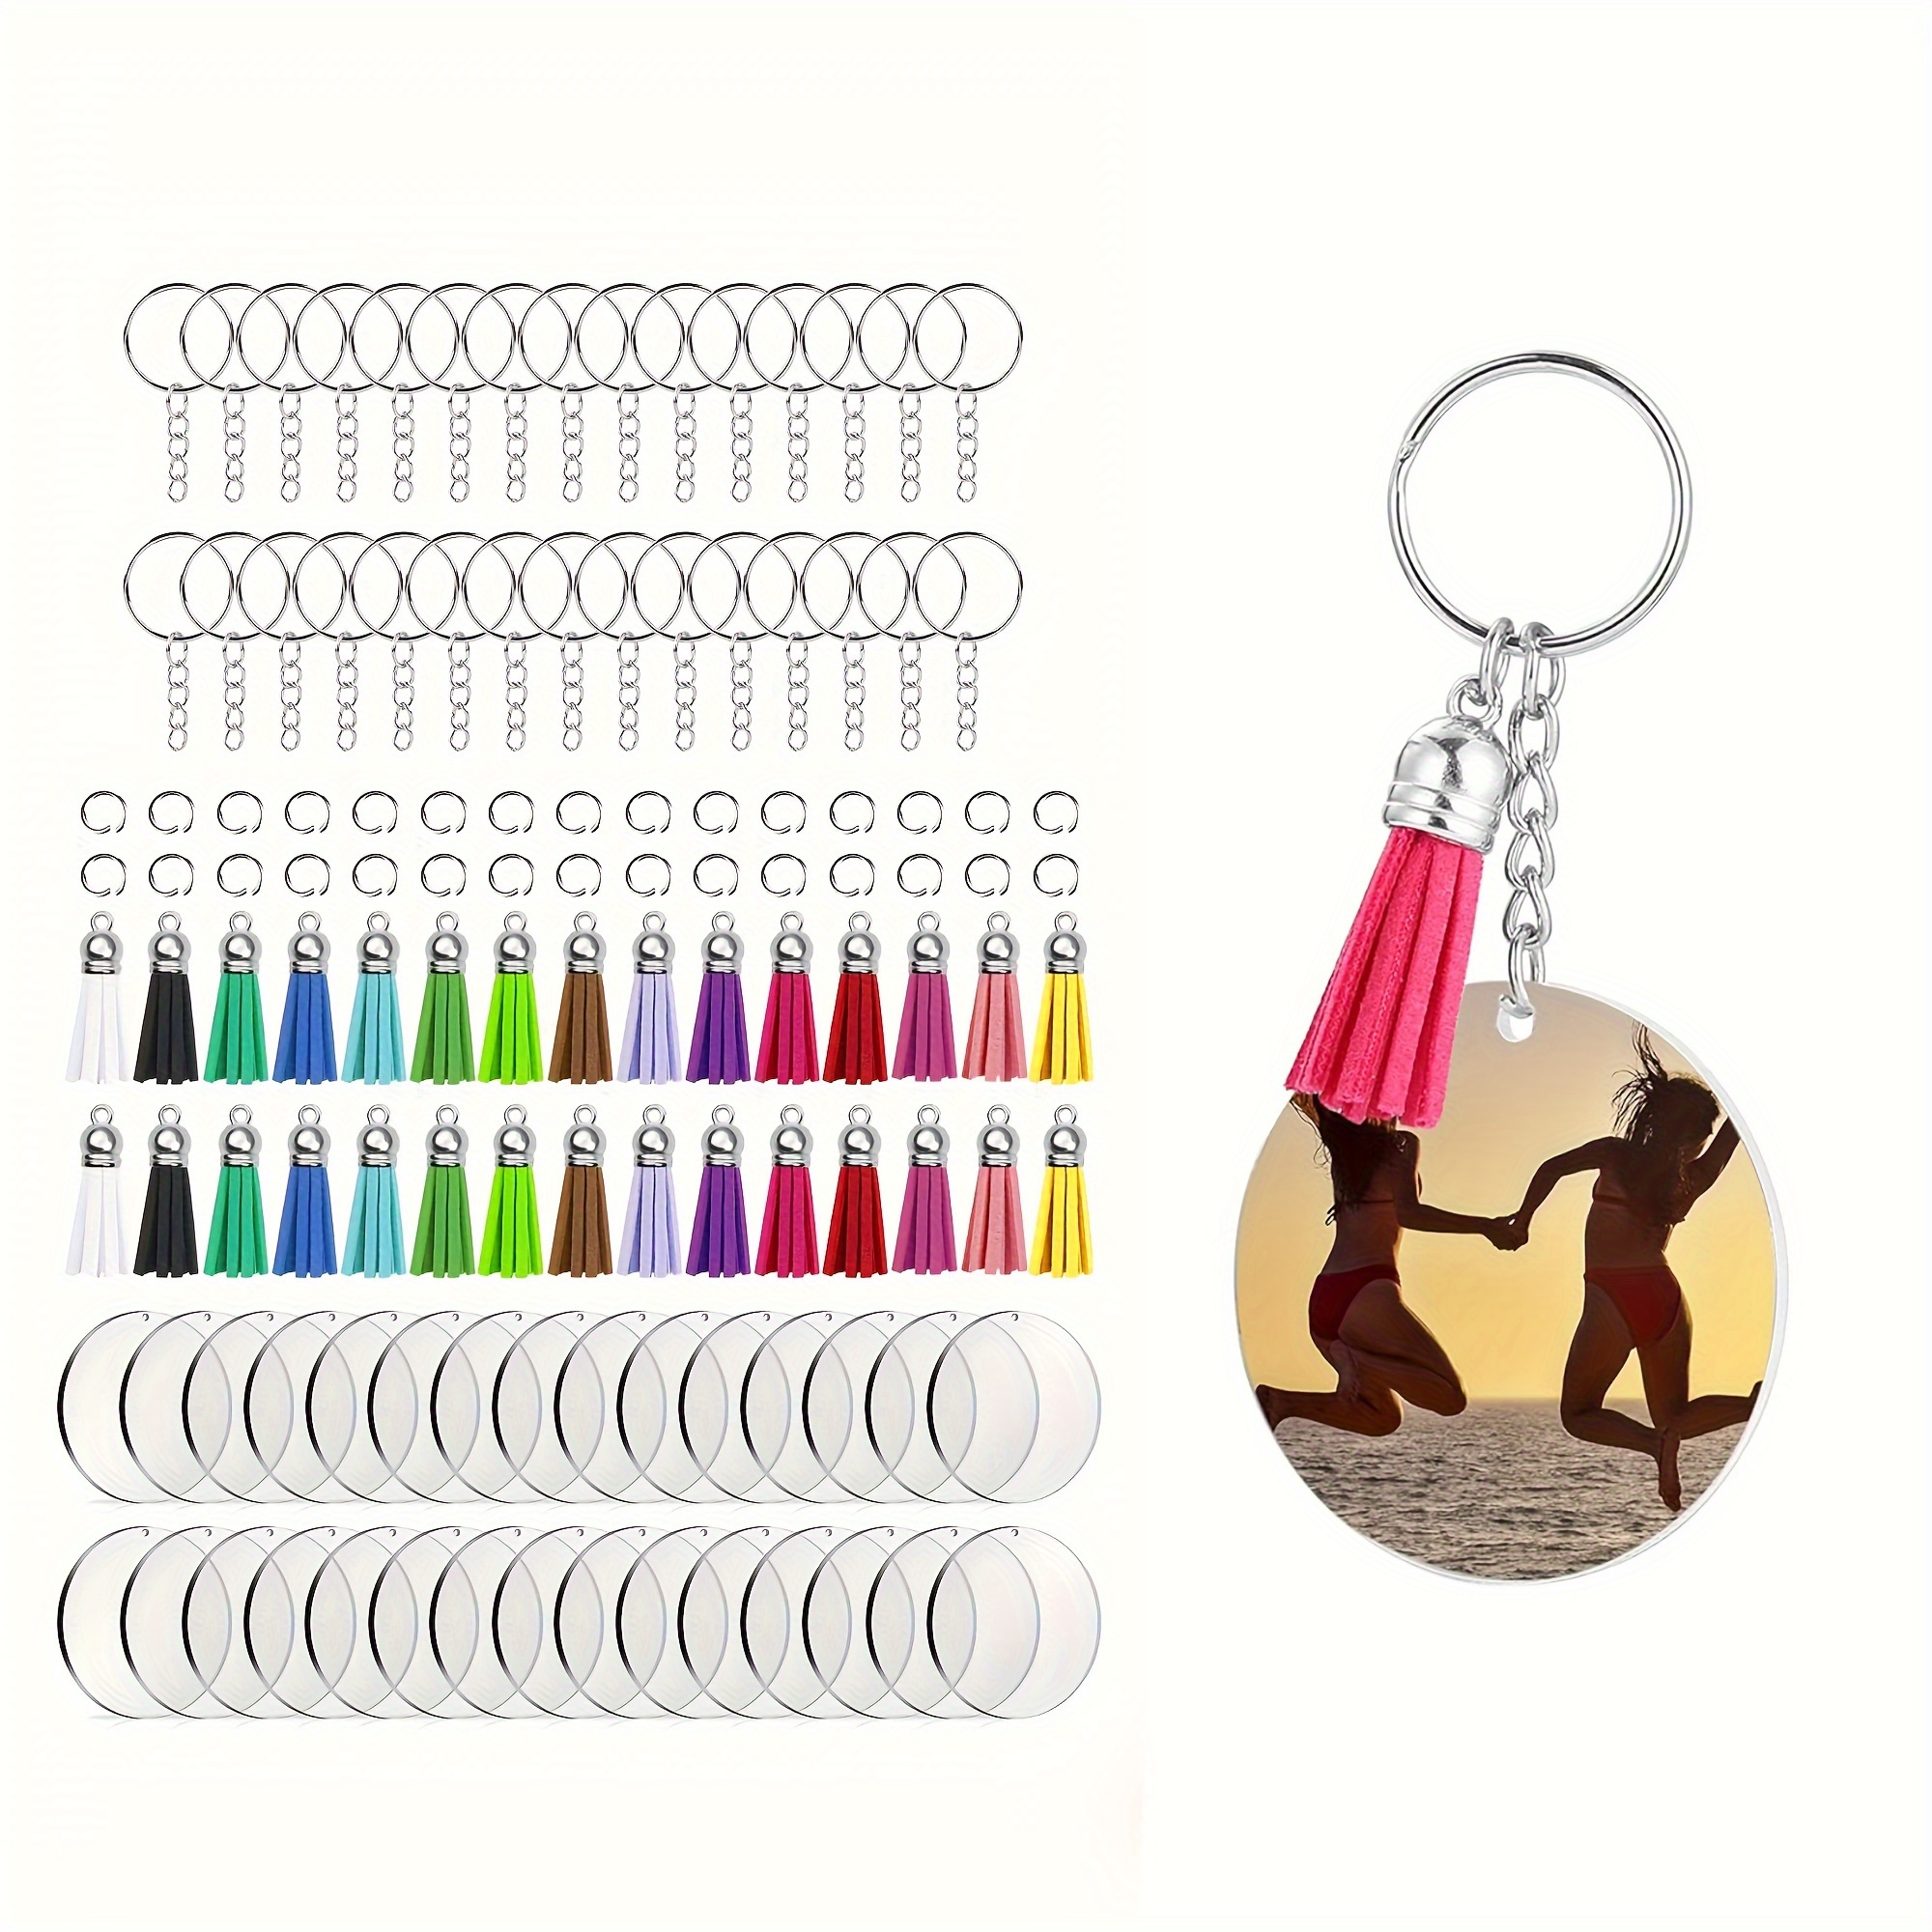 Clear Acrylic Blank Acrylic Keychains With Tassels Charms Set Of 40 For  Vinyl Key Crafts And DIY Ornament From Rainbowwo, $8.46